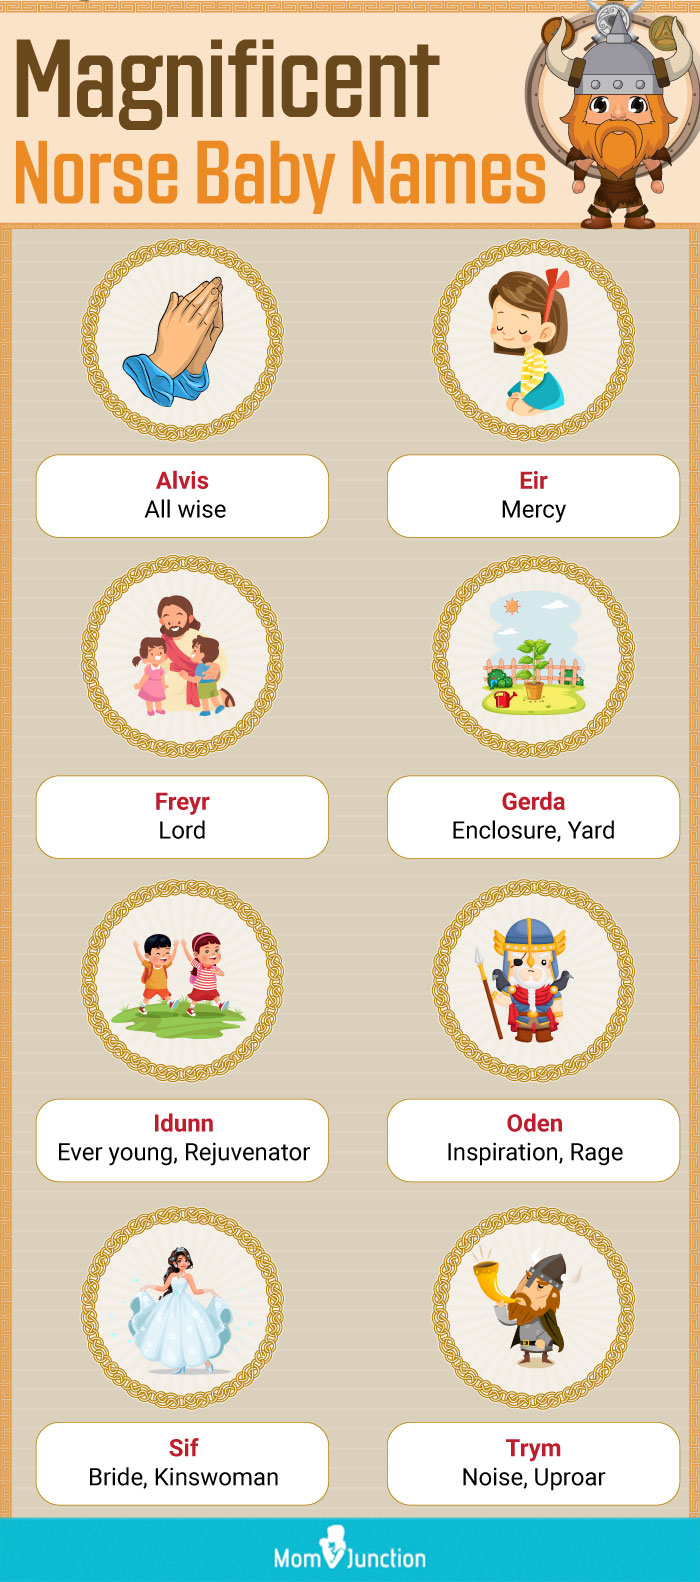 magnificent norse baby names (infographic)